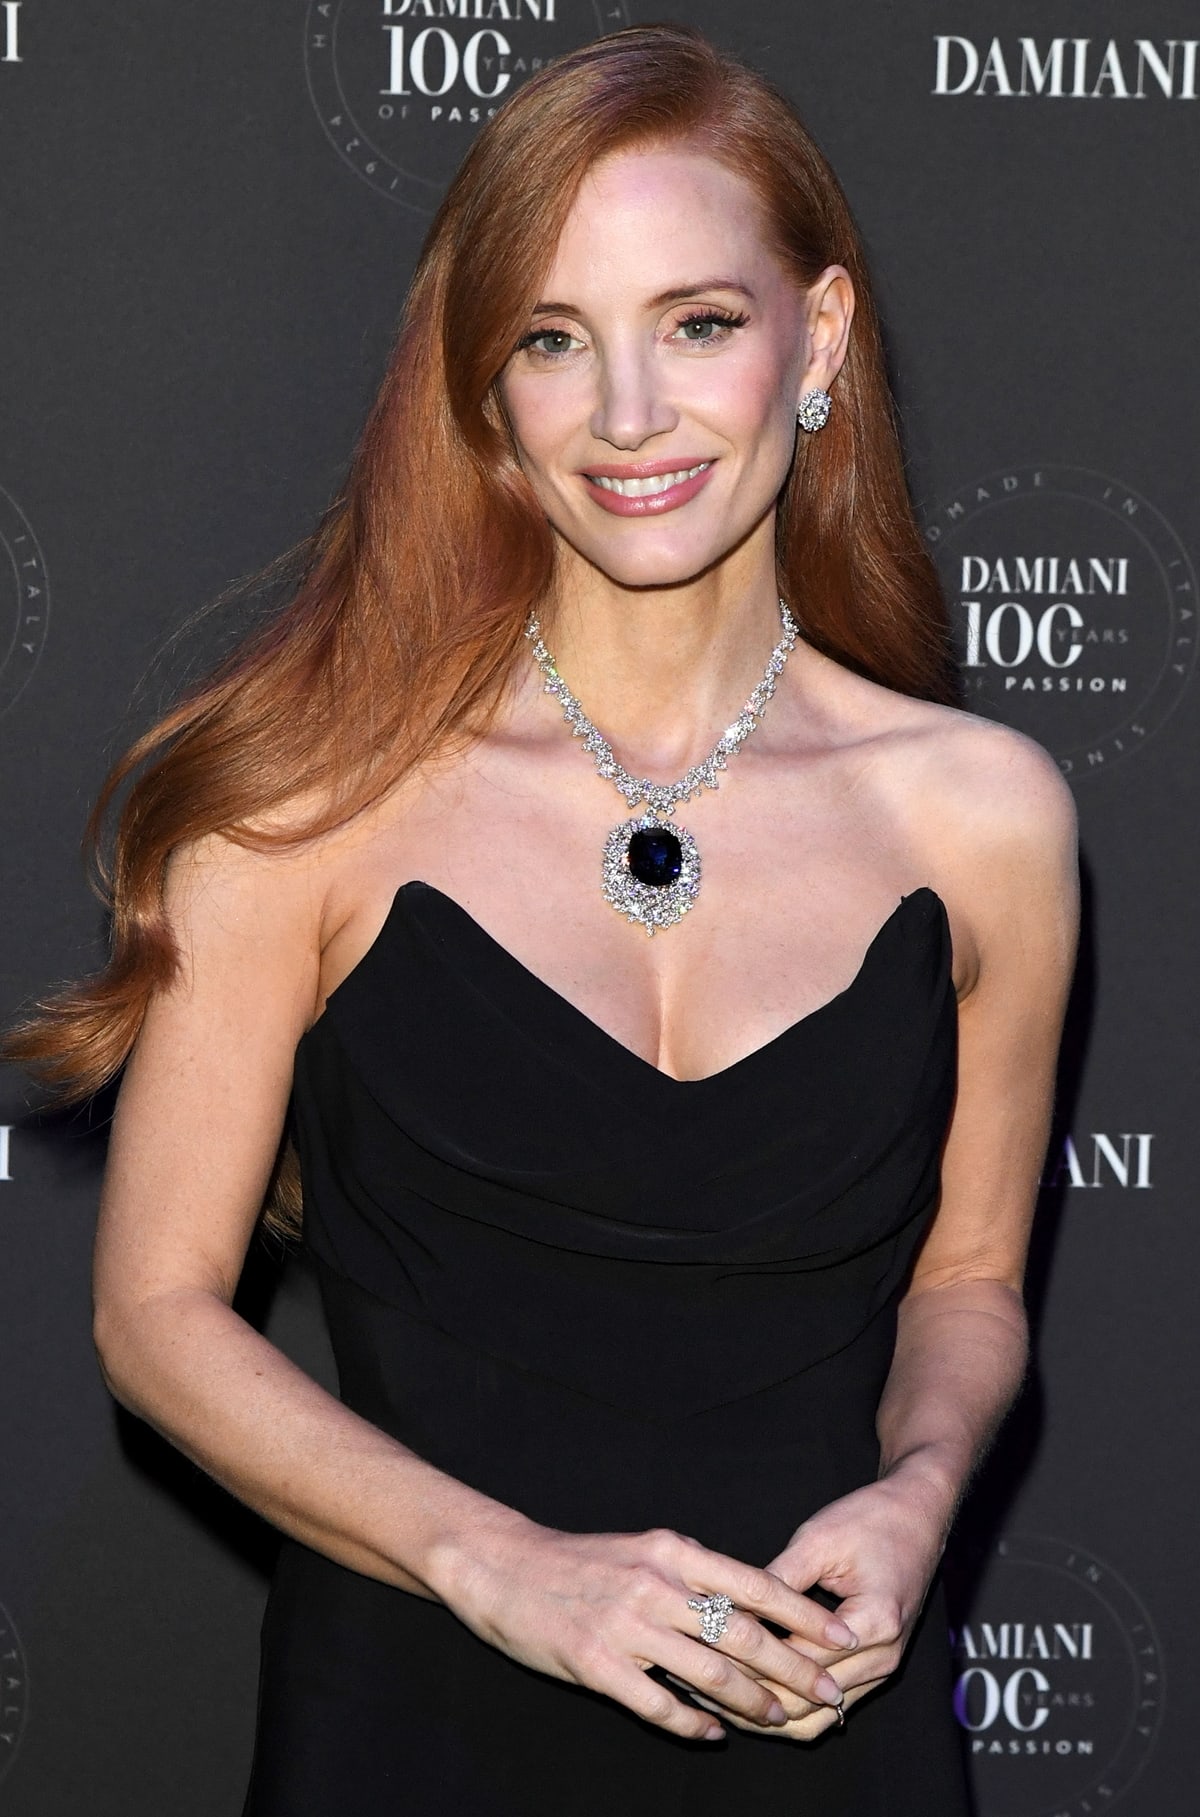 Jessica Chastain graces the Damiani 100th anniversary gala in Milan, her elegance magnified by the breathtaking Damiani sapphire diamond necklace, symbolizing a century of exquisite craftsmanship and luxury